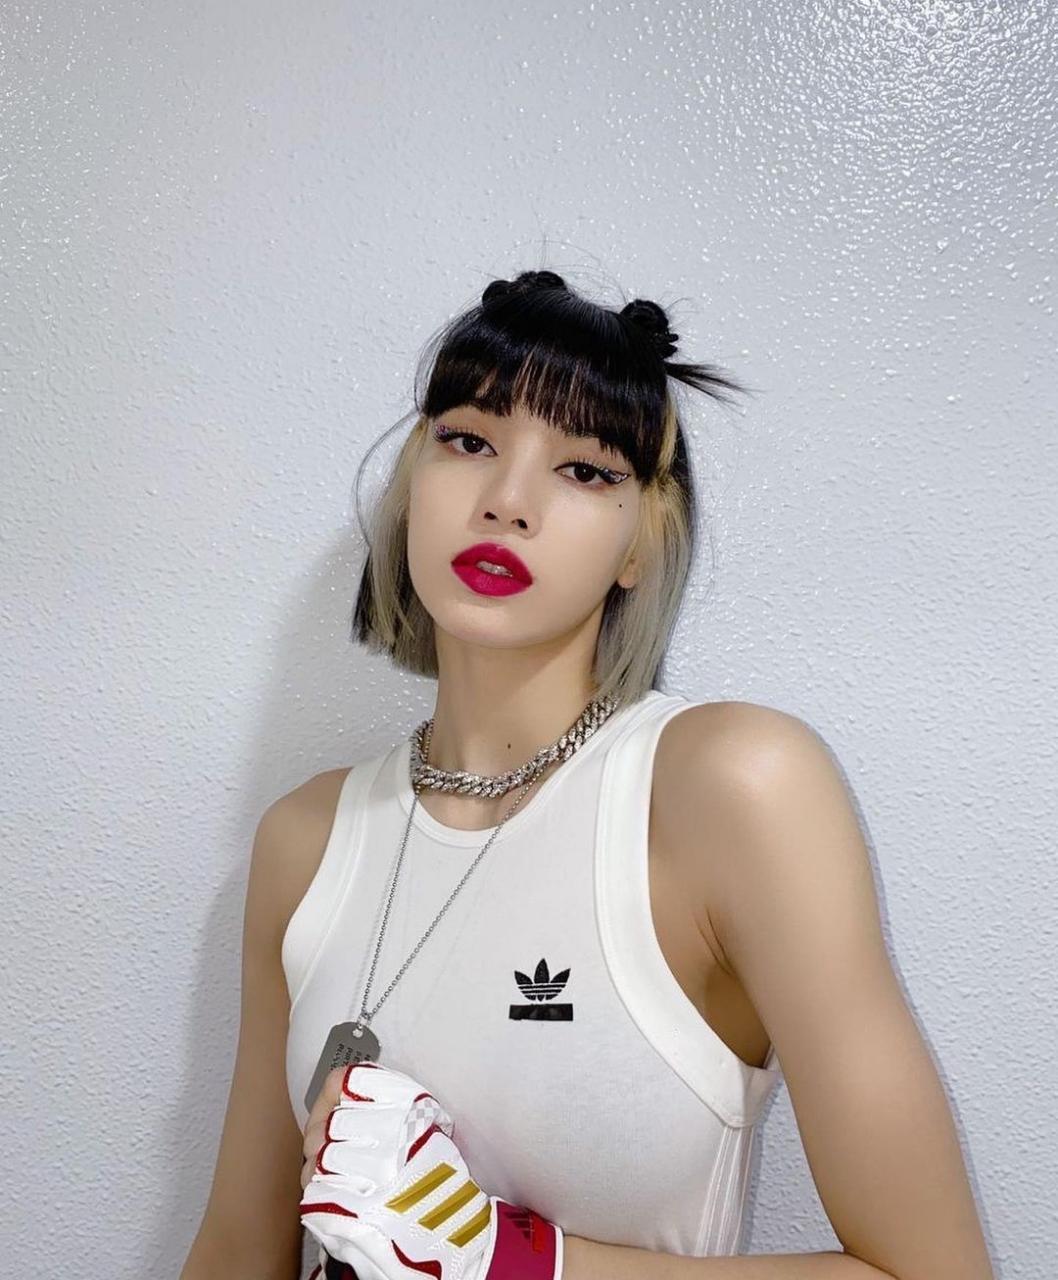 10 Things You Need to Know About Lisa from BLACKPINK - Indigo Music